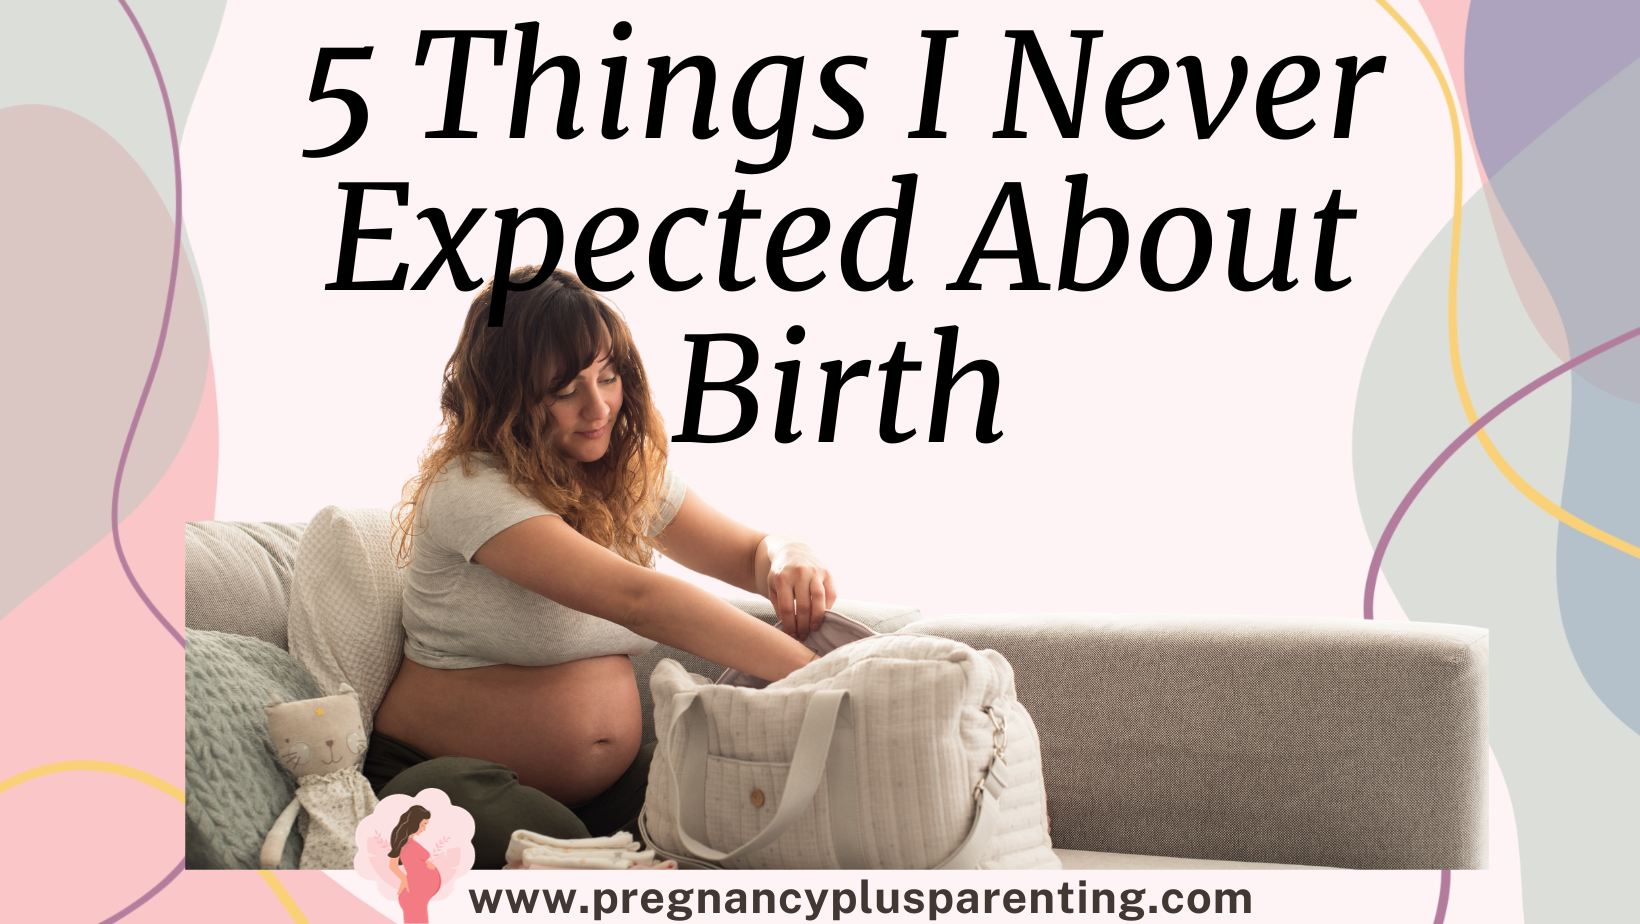 5 Things I Never Expected About Birth